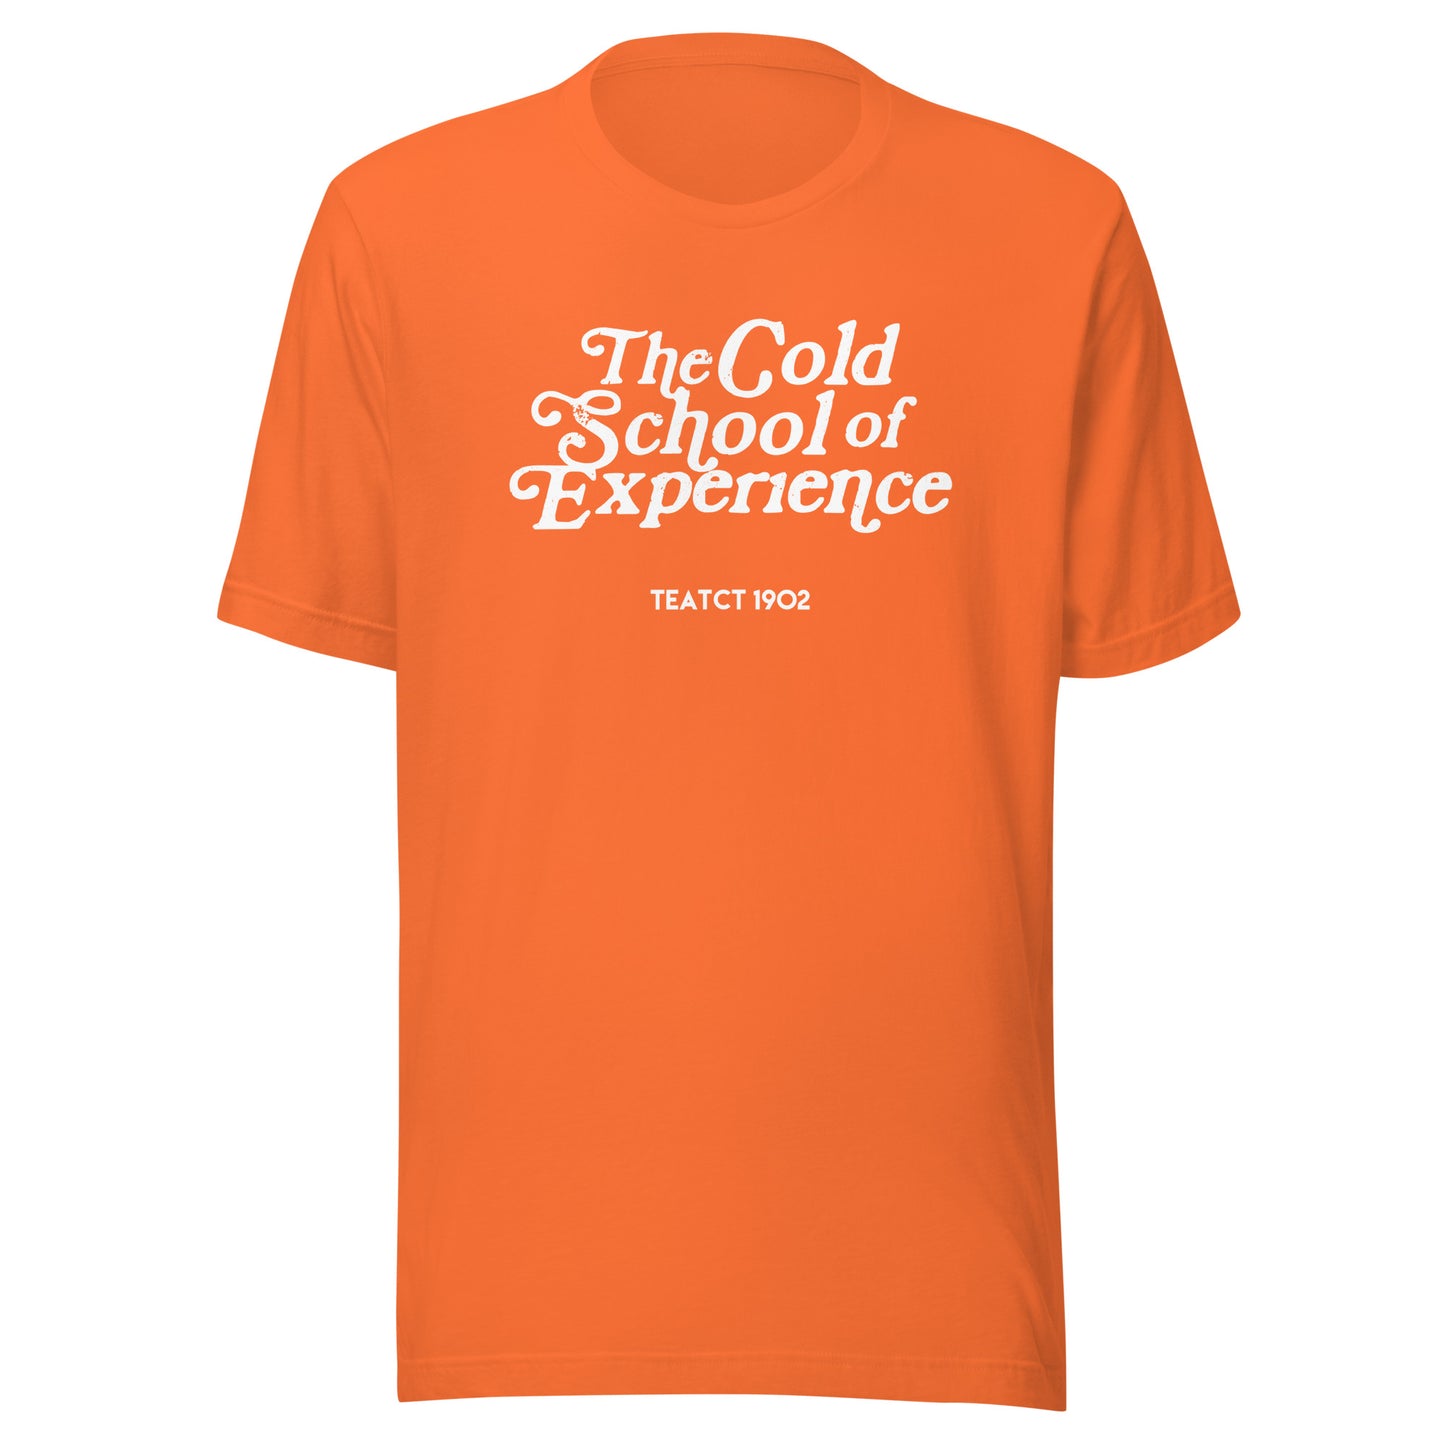 The COLD SCHOOL T-Shirt